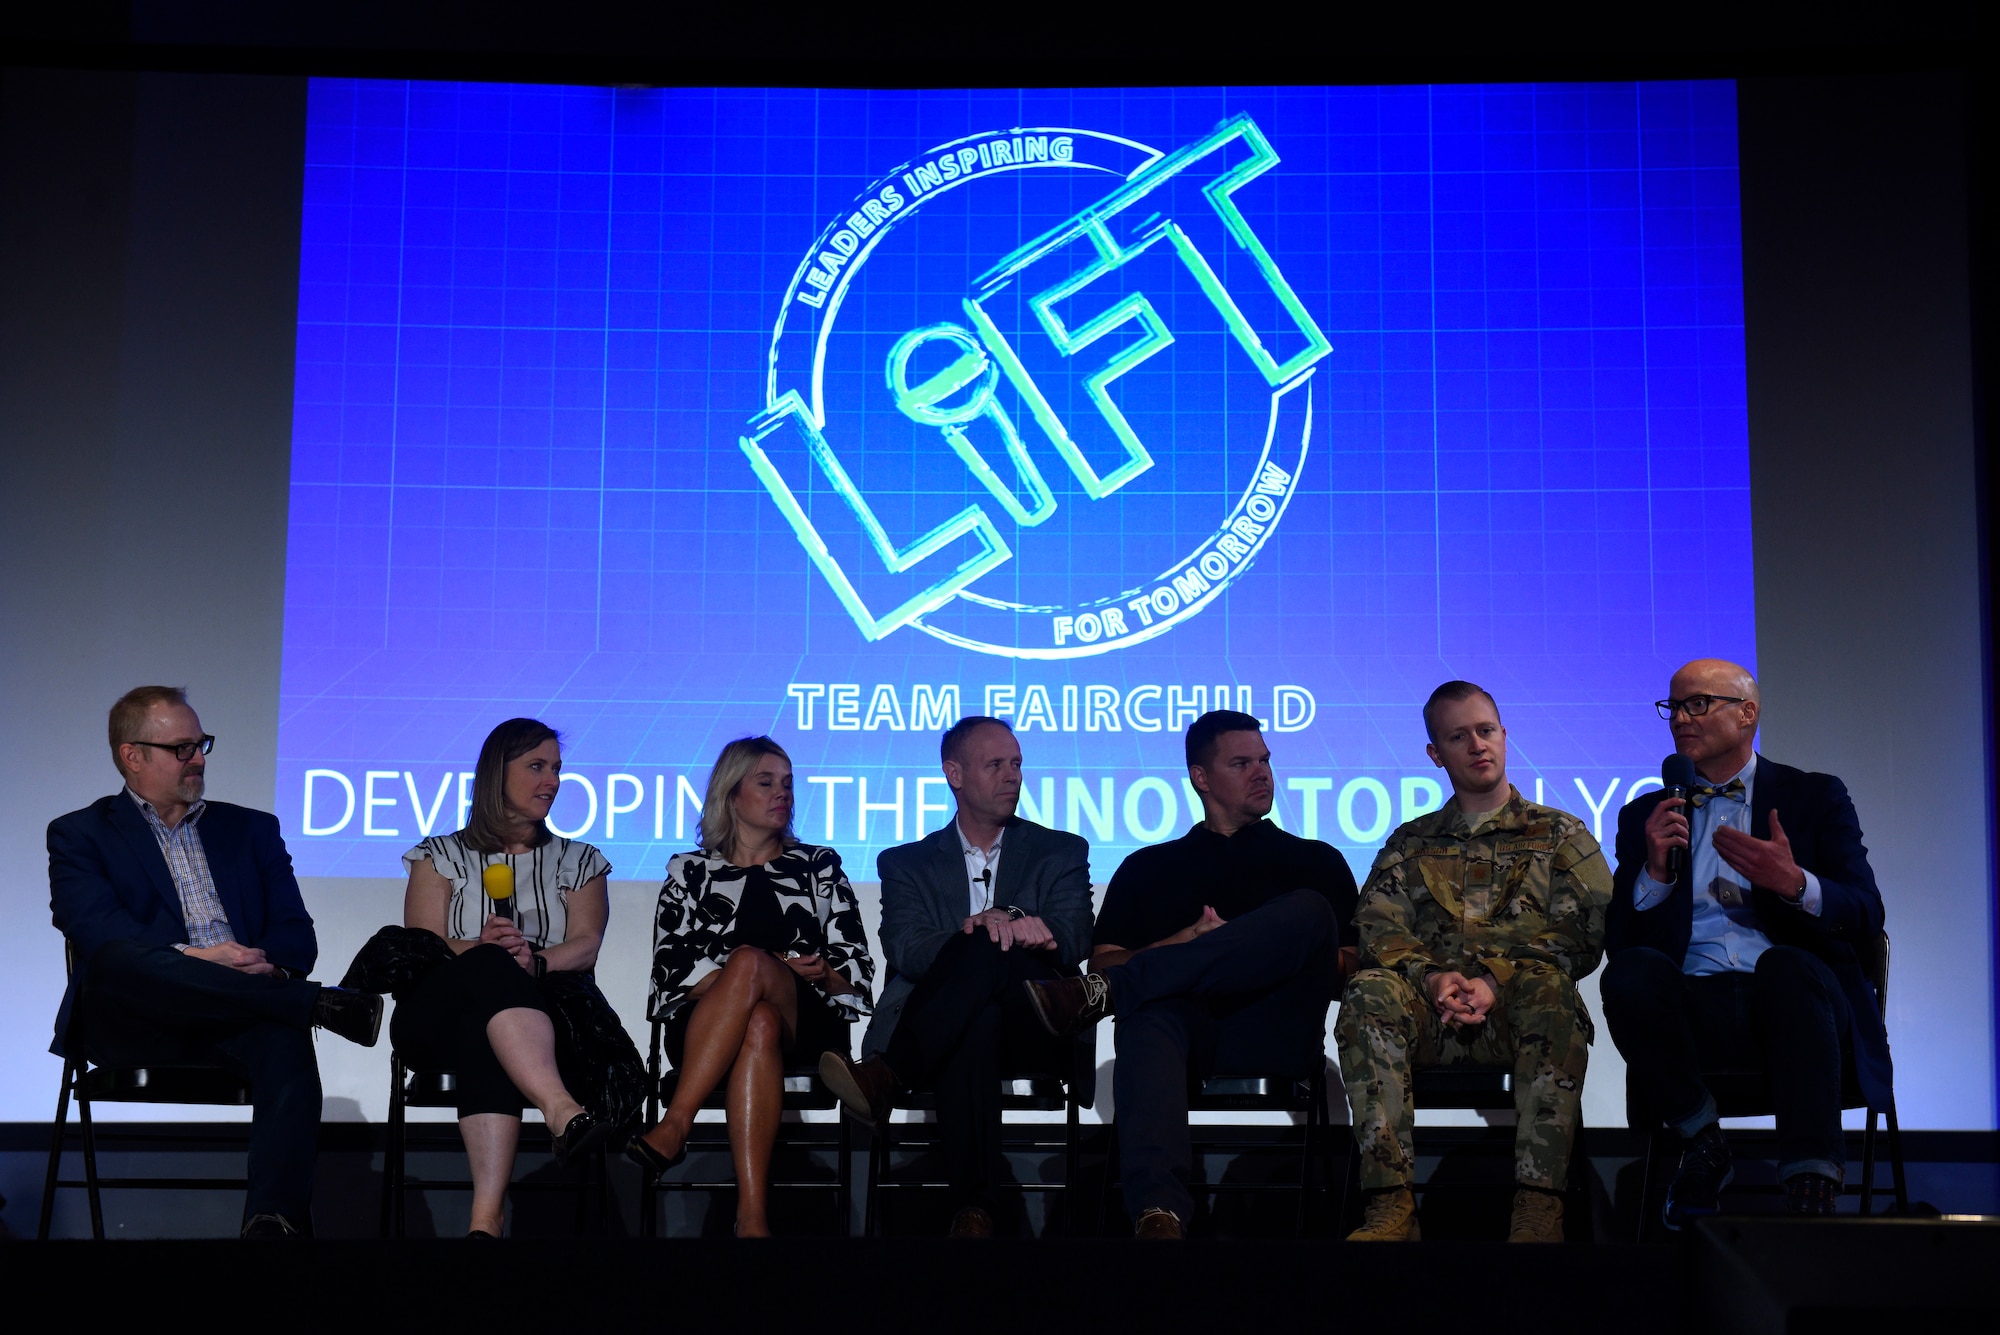 A panel of presenters for the 2019 Leaders Inspiring for Tomorrow summit answers attendees’ questions in base theater at Fairchild Air Force Base, Washington, April 19, 2019. New to this year’s summit, a 40-minute panel was held for those in attendance to have their questions directly answered by the speakers. (U.S. Air Force photo by Airman 1st Class Lawrence Sena)